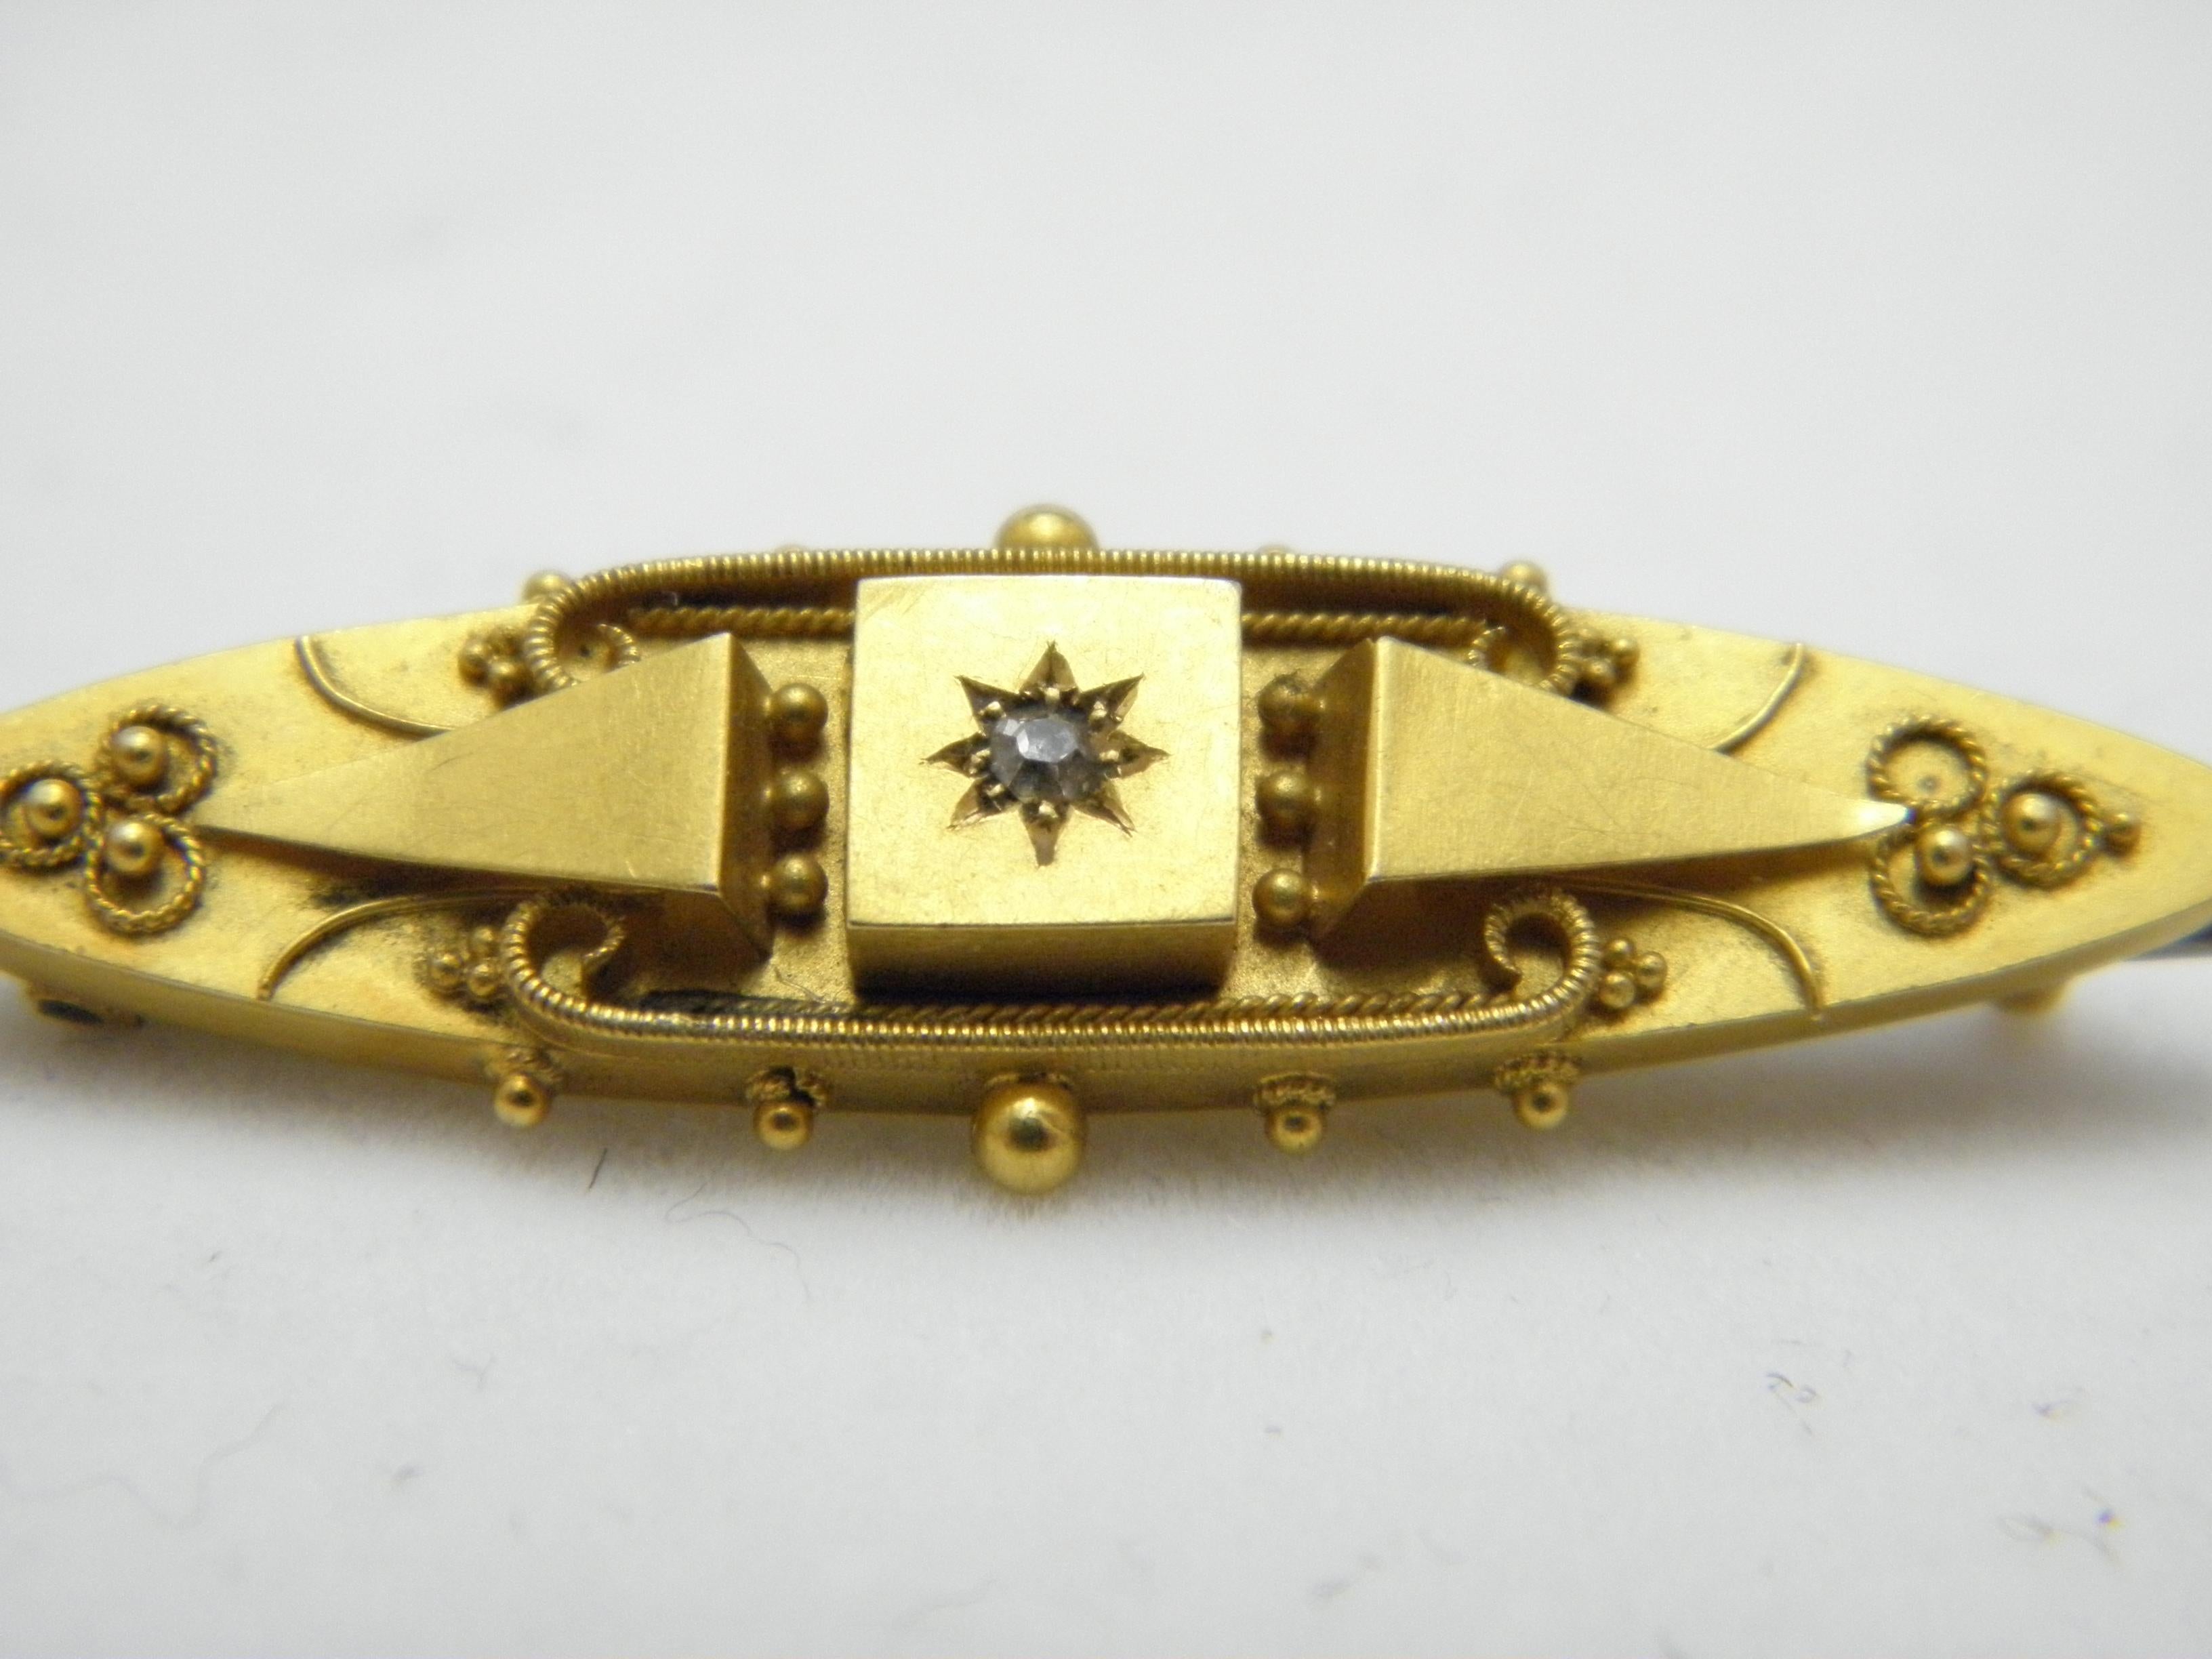 Antique 15ct Gold Diamond Bar Brooch Pin C1900 2.7g 625 Purity Chester HM In Good Condition For Sale In Camelford, GB